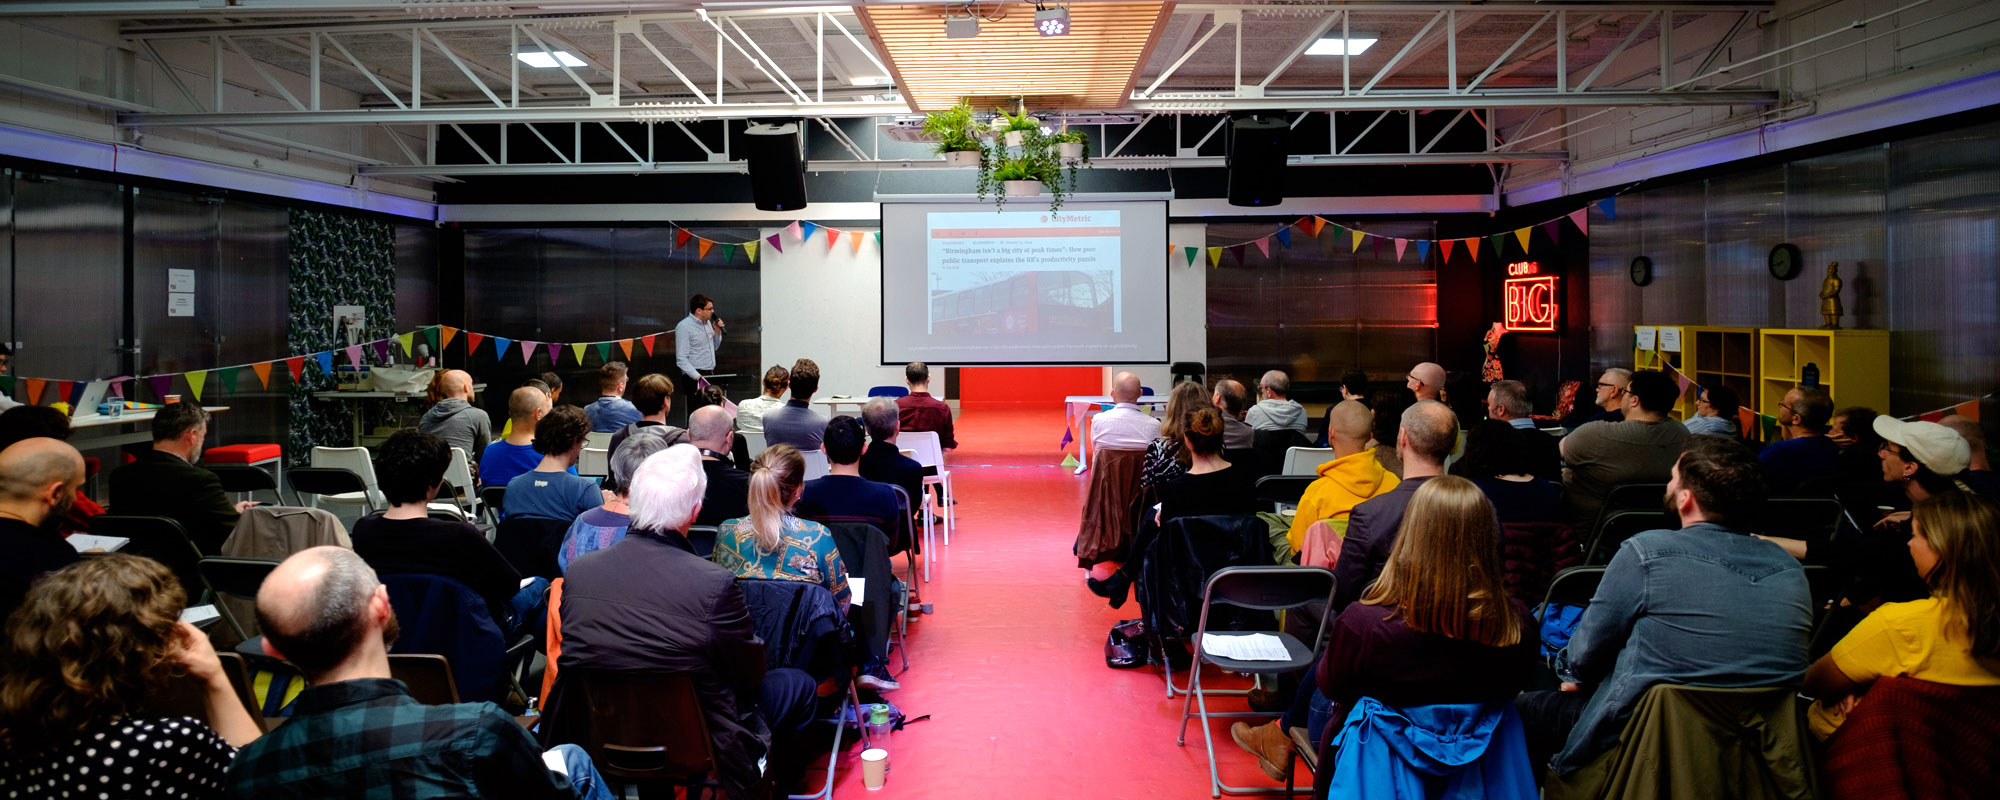 View from the audience at the Festival of Maintenance, taking place a low, wide event space with a red floor and a projection screen in the middle